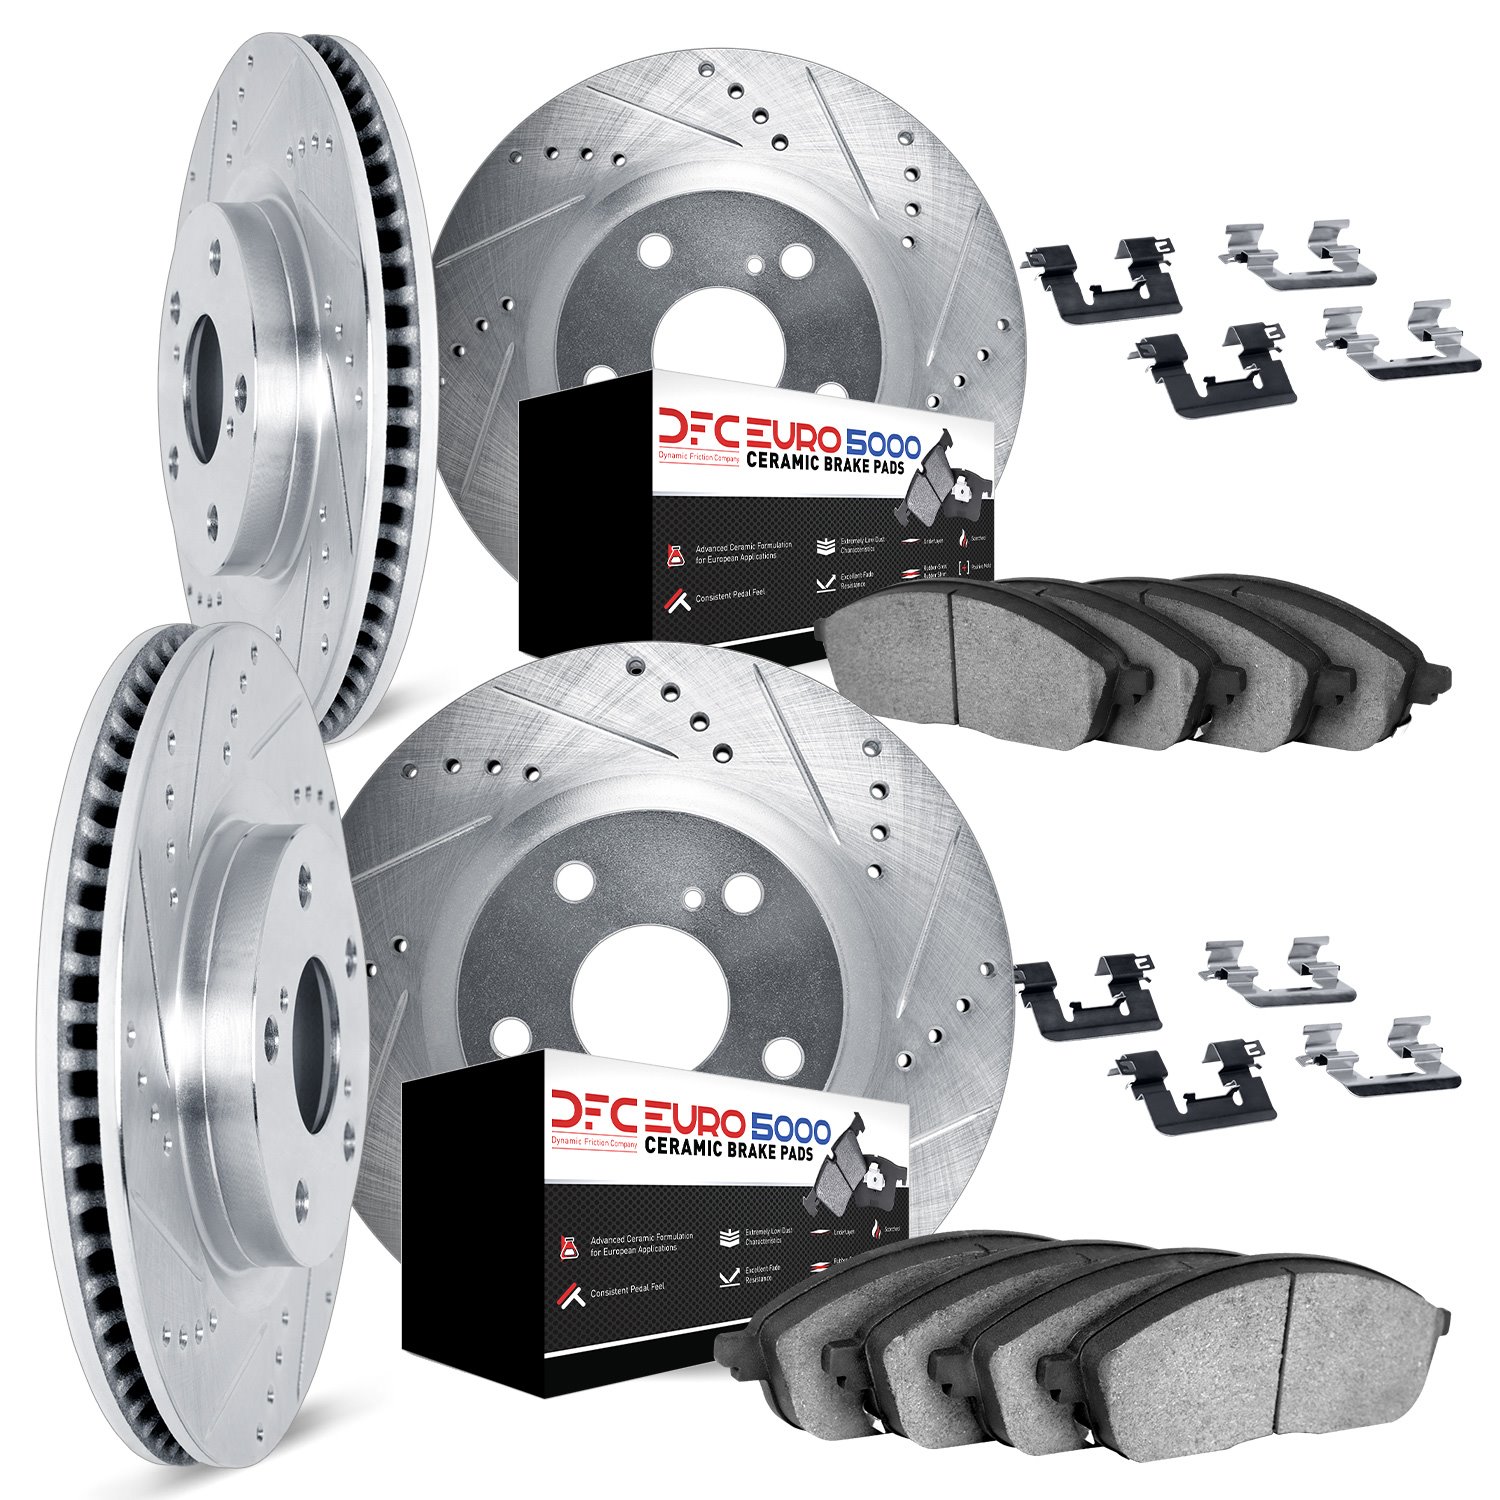 7614-42001 Drilled/Slotted Brake Rotors w/5000 Euro Ceramic Brake Pads Kit & Hardware [Silver], Fits Select Mopar, Position: Fro